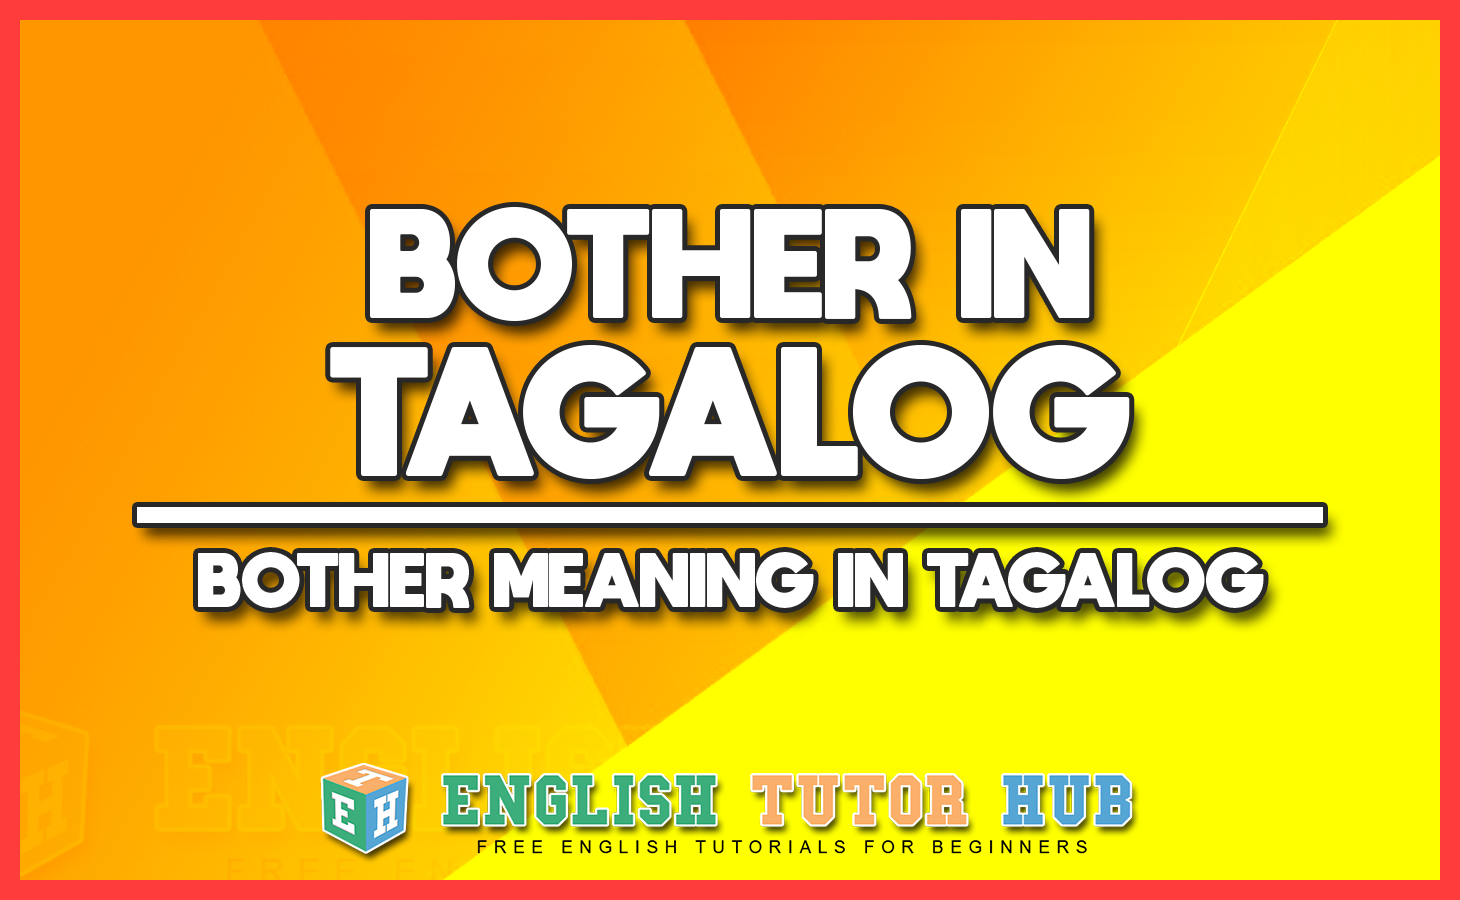 BOTHER IN TAGALOG - BOTHER MEANING IN TAGALOG